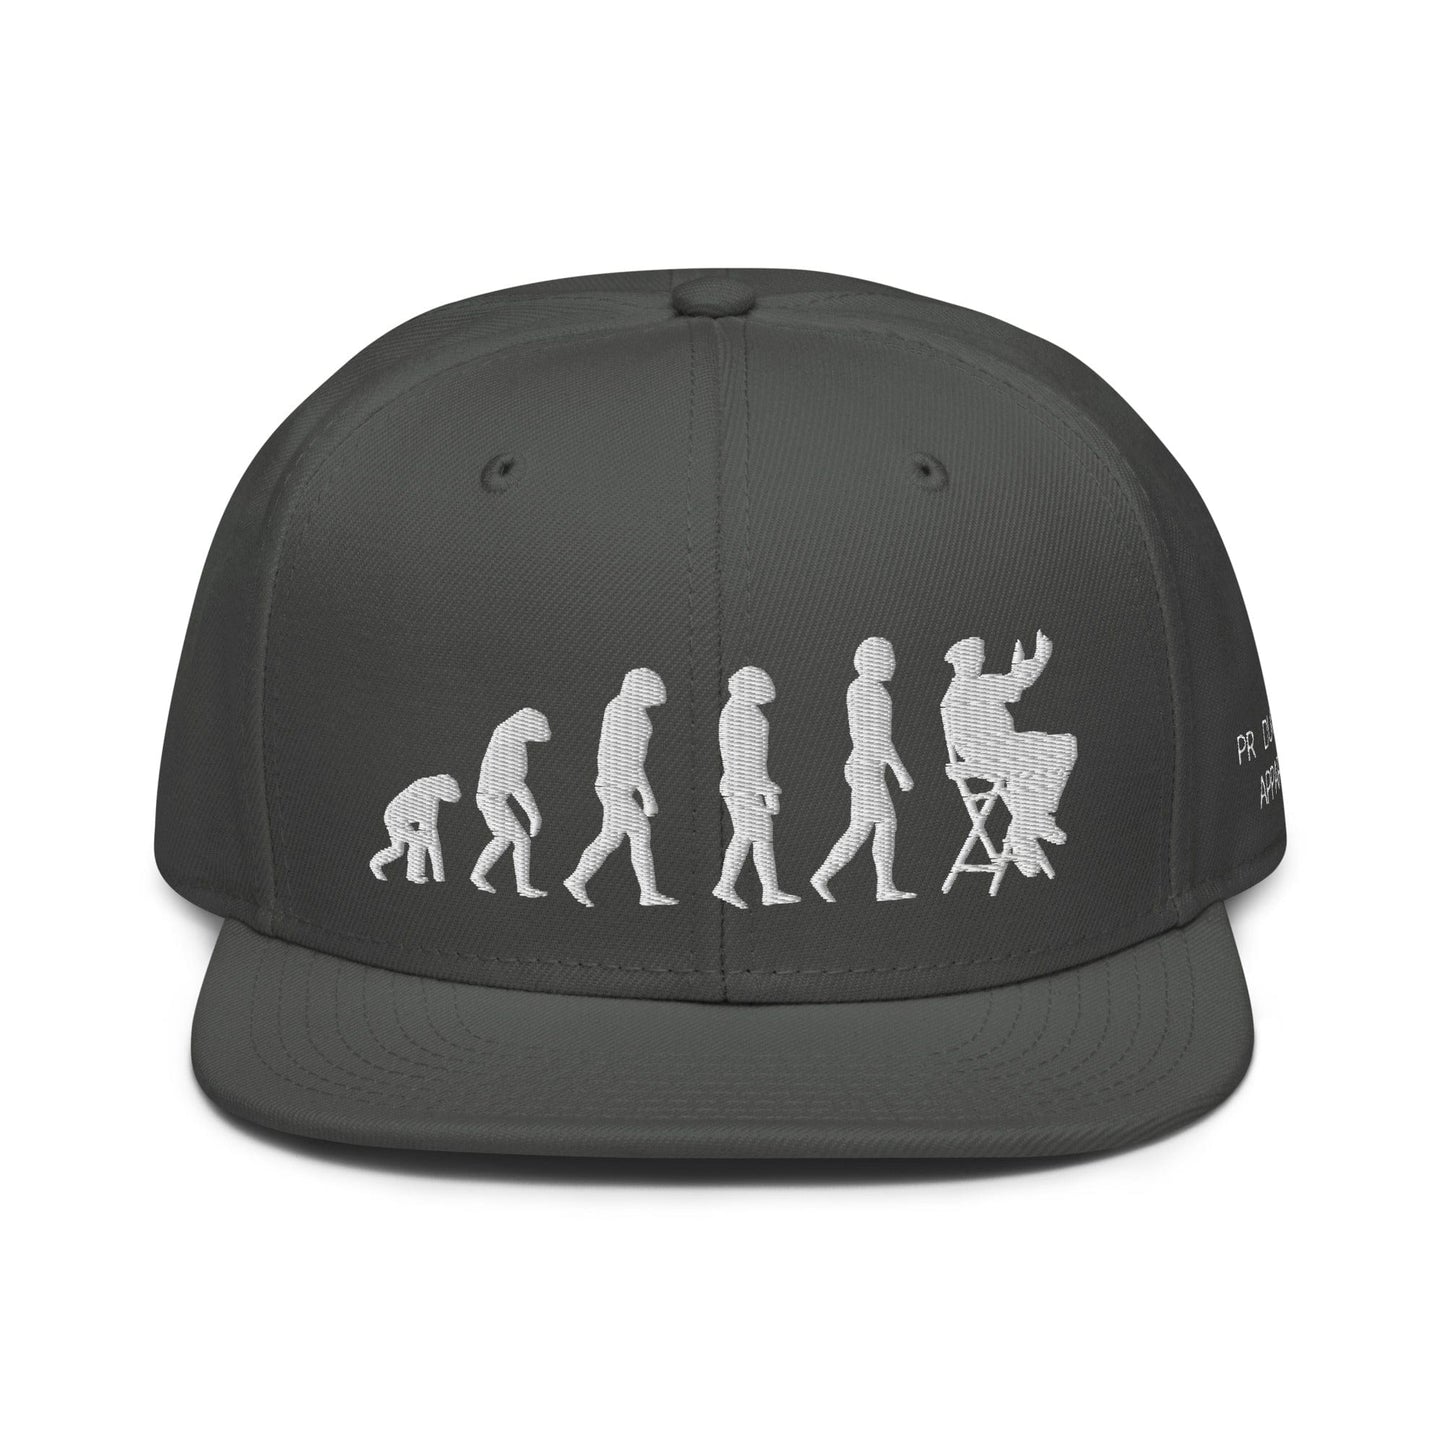 Production Apparel Director Evolution Hat Charcoal gray